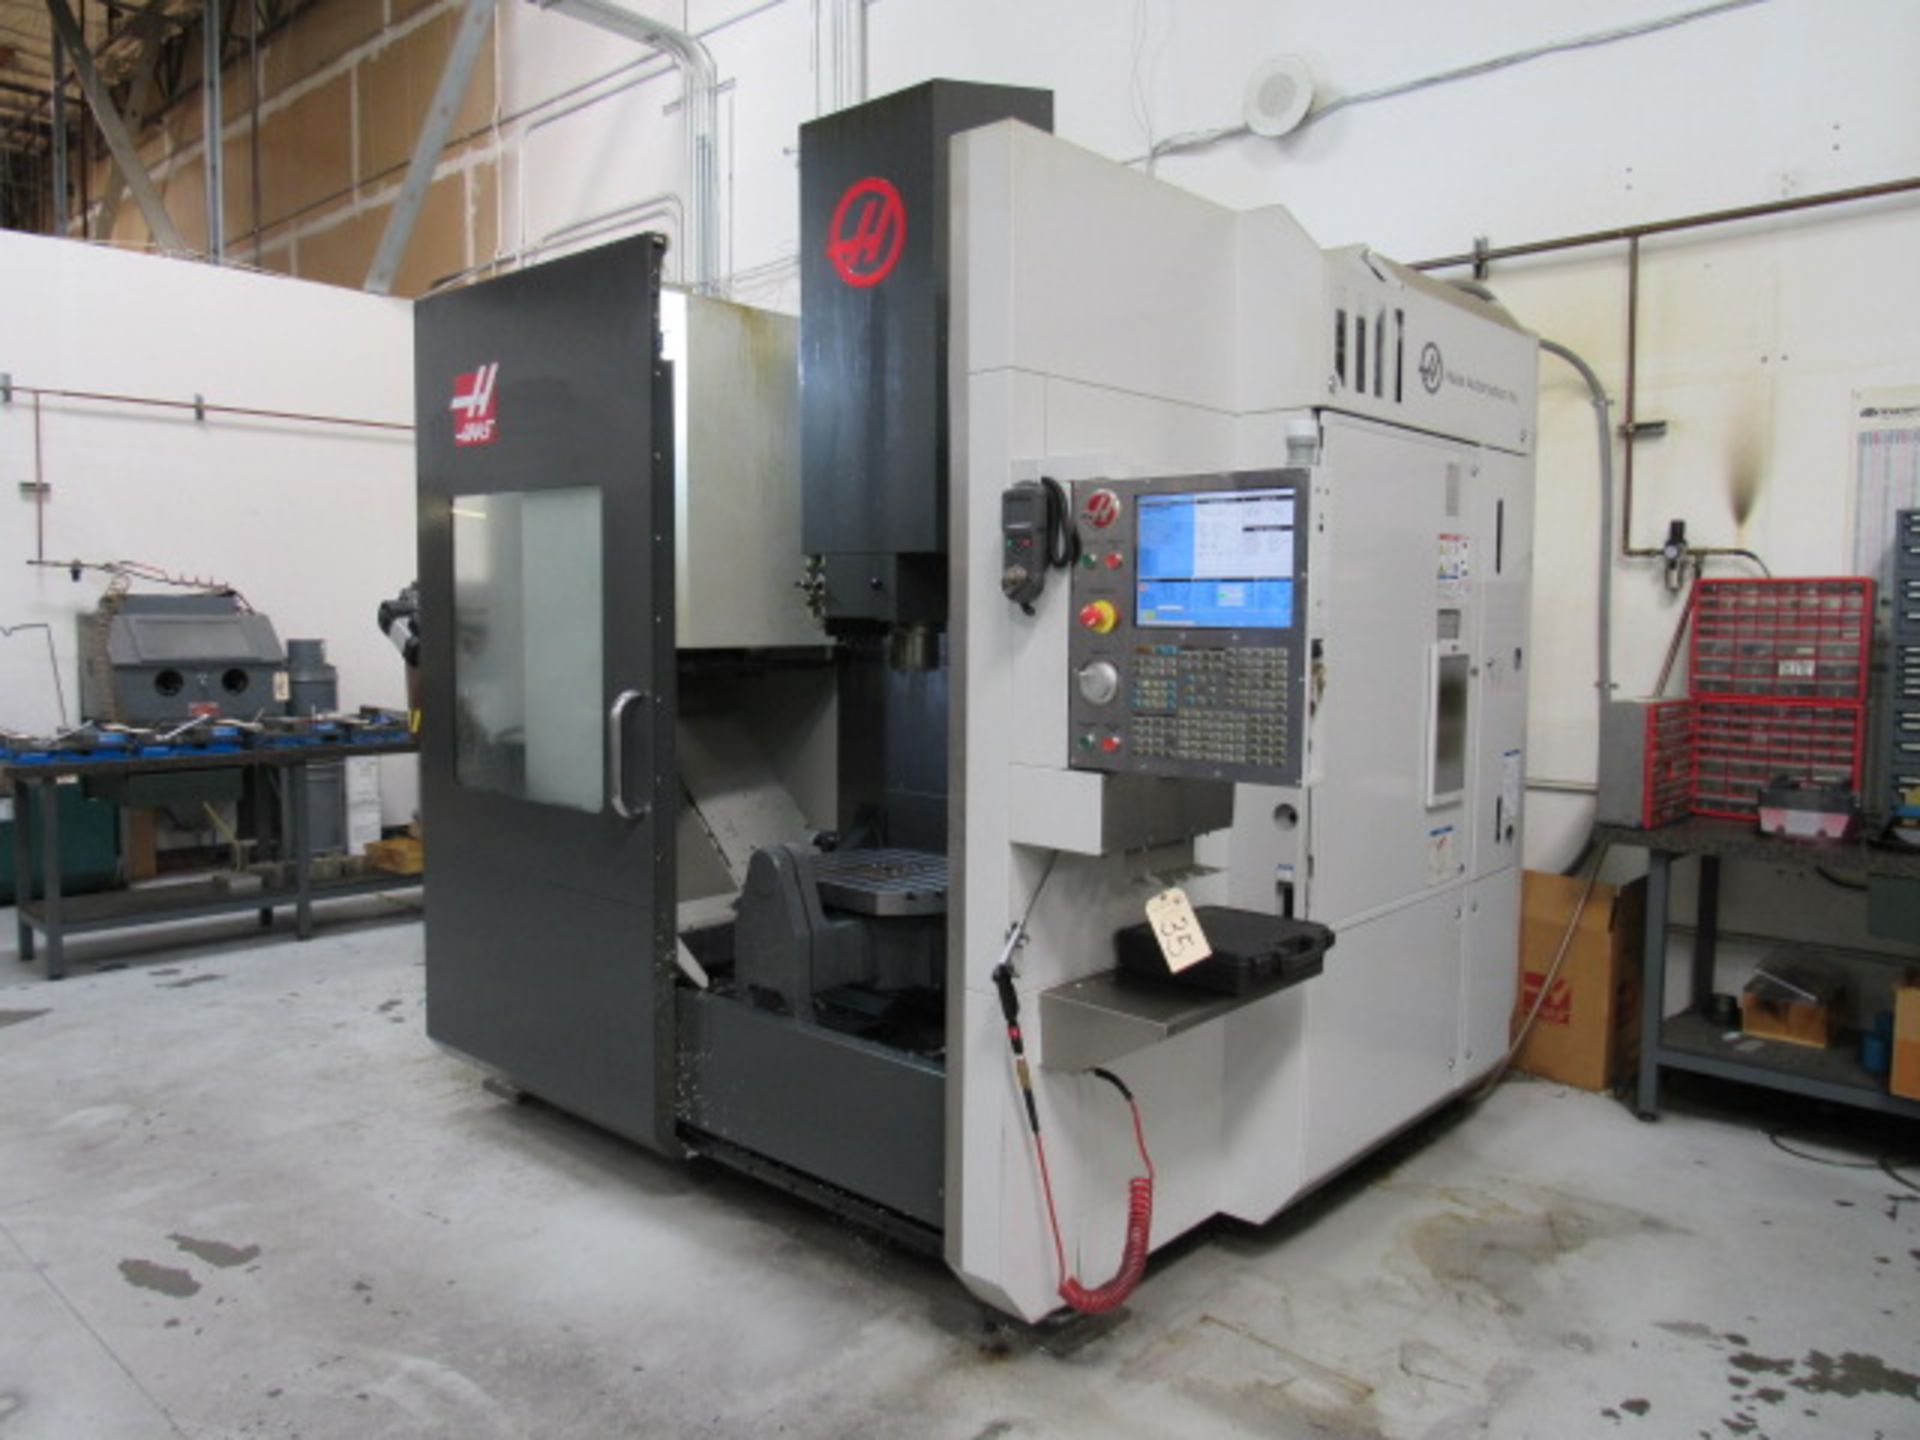 Haas UMC750 5-Axis CNC Vertical Machining Center - Image 8 of 12